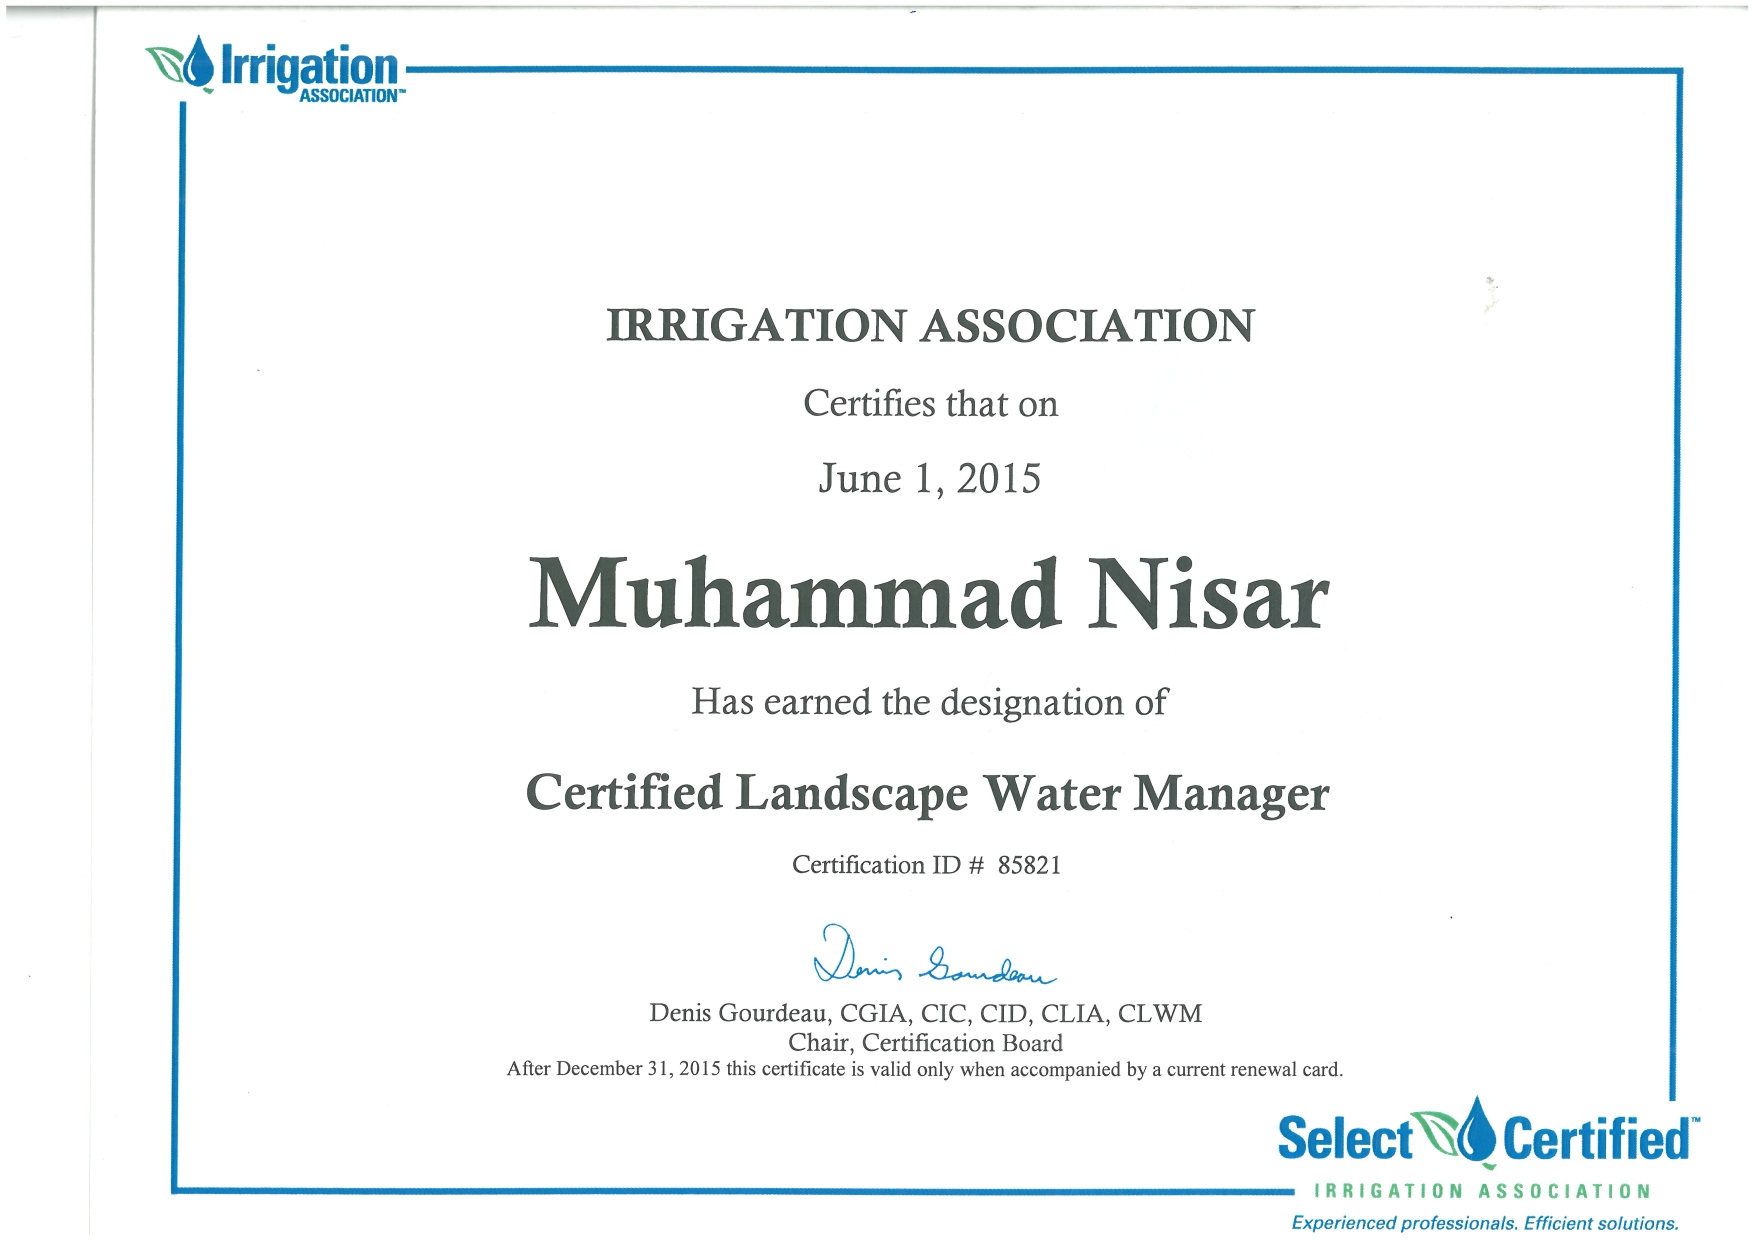 IRRIGATION ASSOCIATION
Certifies that on

June 1, 2015

Muhammad Nisar

Has earned the designation of

Certified Landscape Water Manager

Certification ID # 85821

(
Denis Gourdeau, CGIA, CIC, CID, CLIA, CLWM

Chair, Certification Board
After December 31, 2015 this certificate 1s valid only when accompanied by a current renewal card

Select® Certified

IRRIGATION ASSOCIATION

Experienced professionals. Efficient solutions.